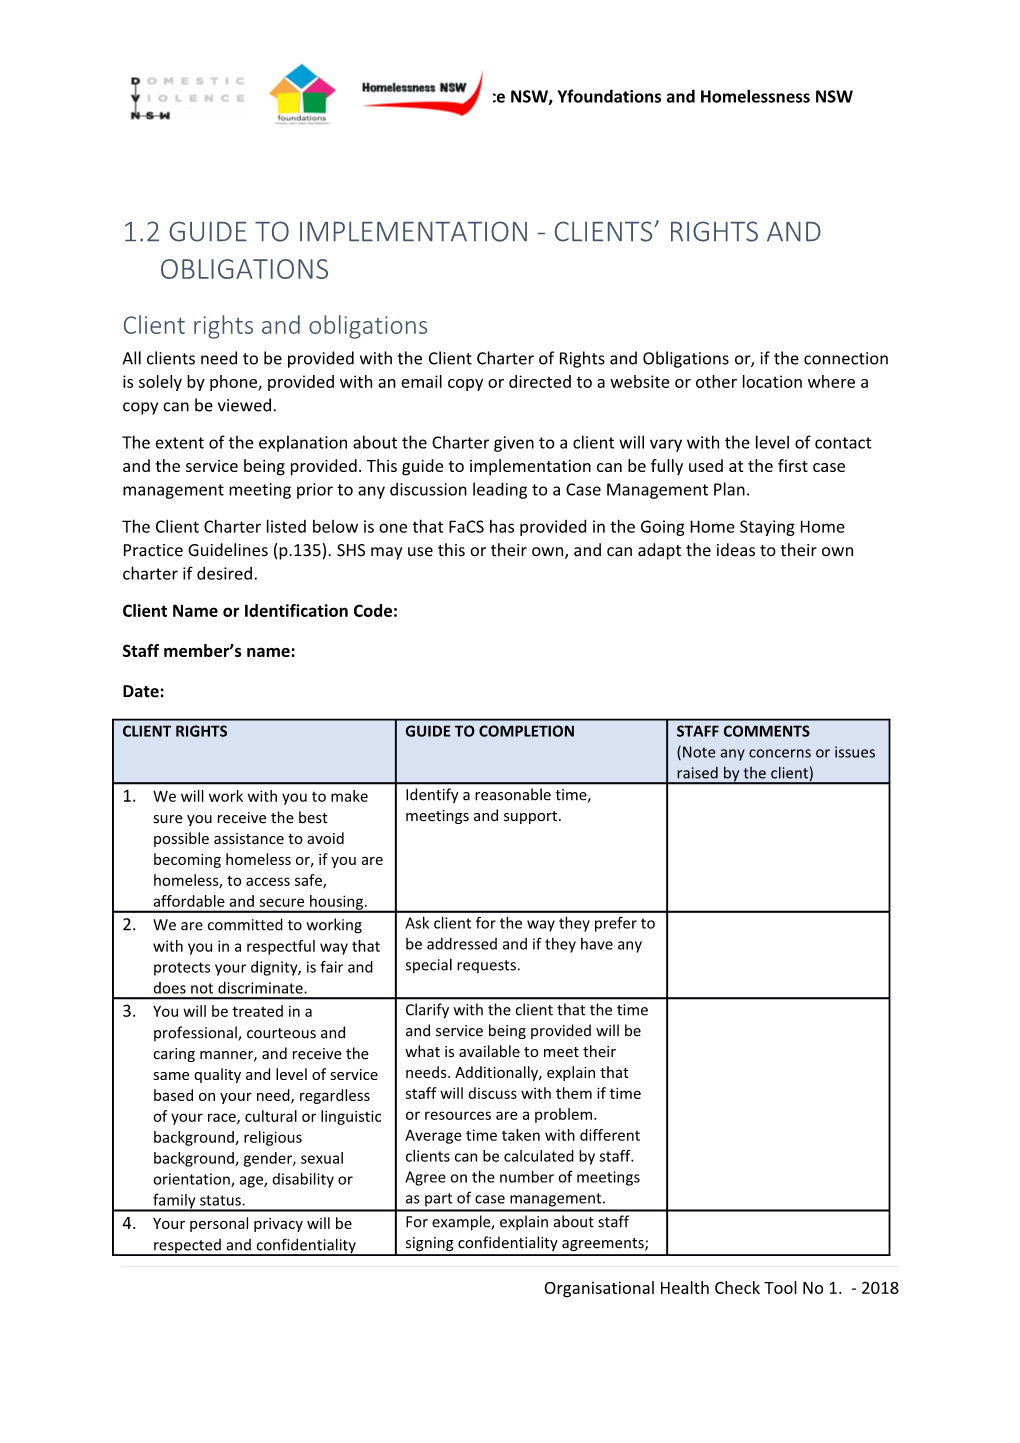 1.2 Guide to Implementation - Clients Rights and Obligations